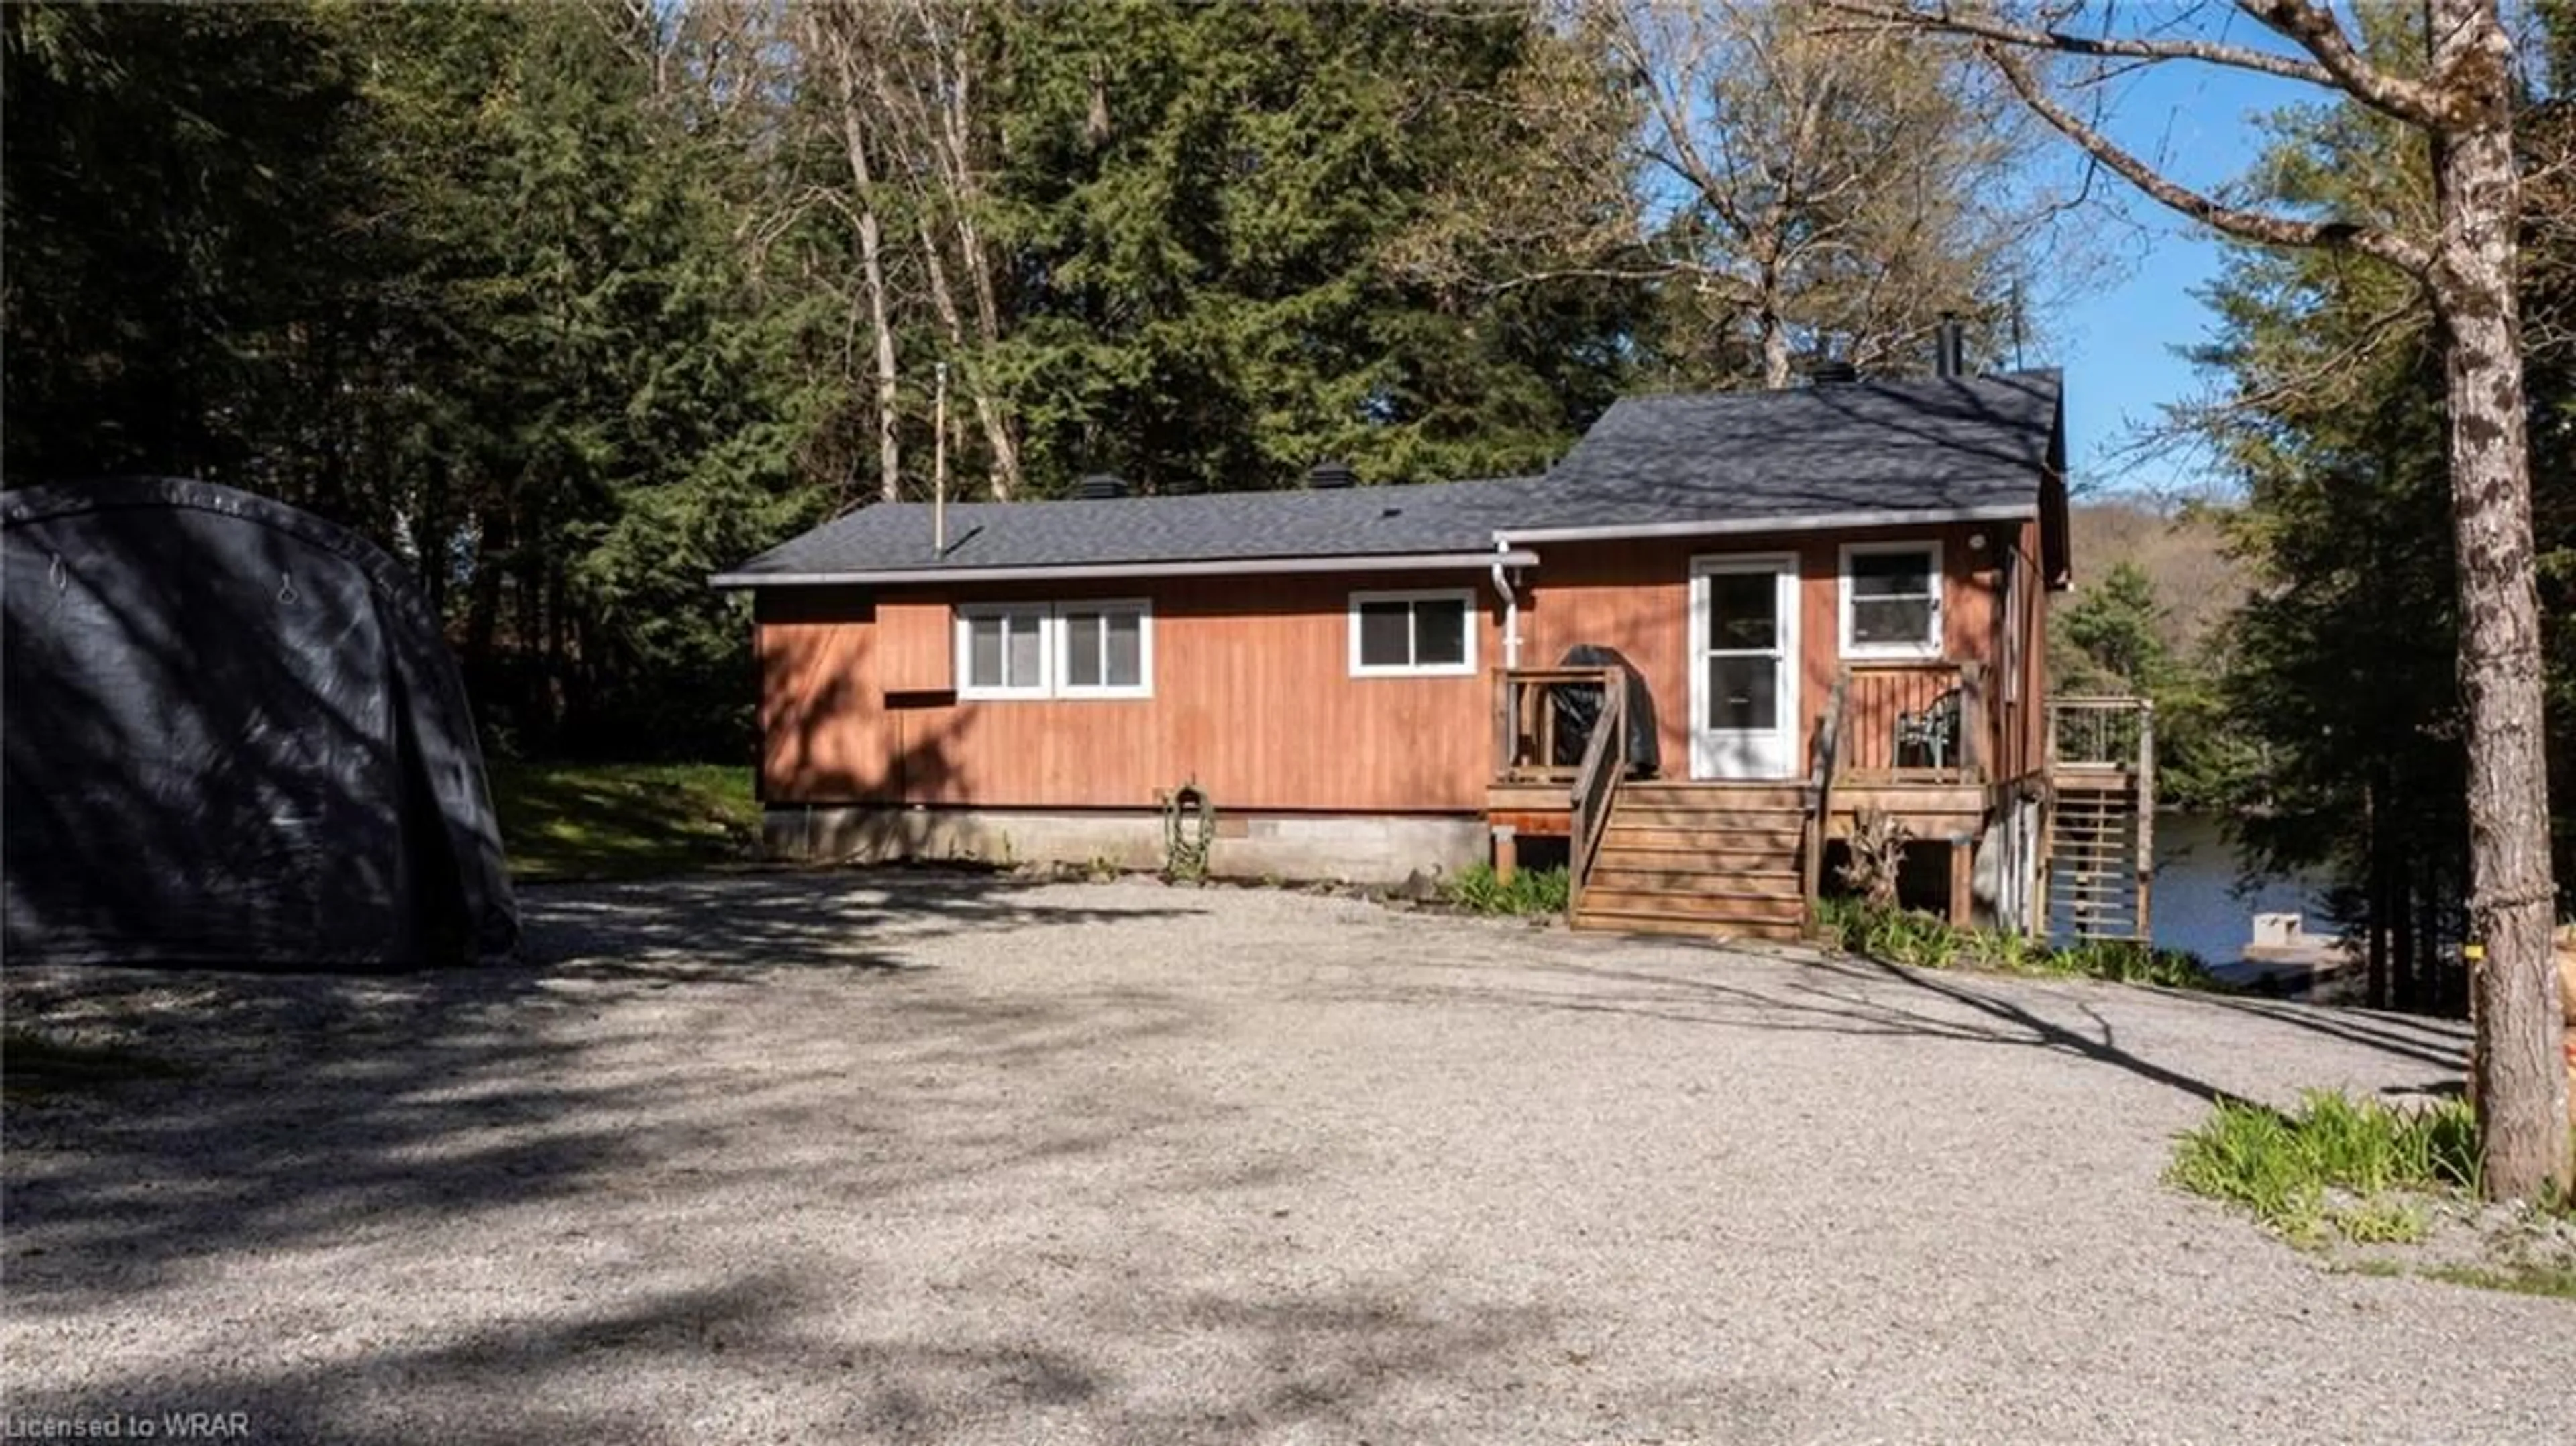 Cottage for 162 Iroquois Rd Rd, MacTier Ontario P0C 1H0